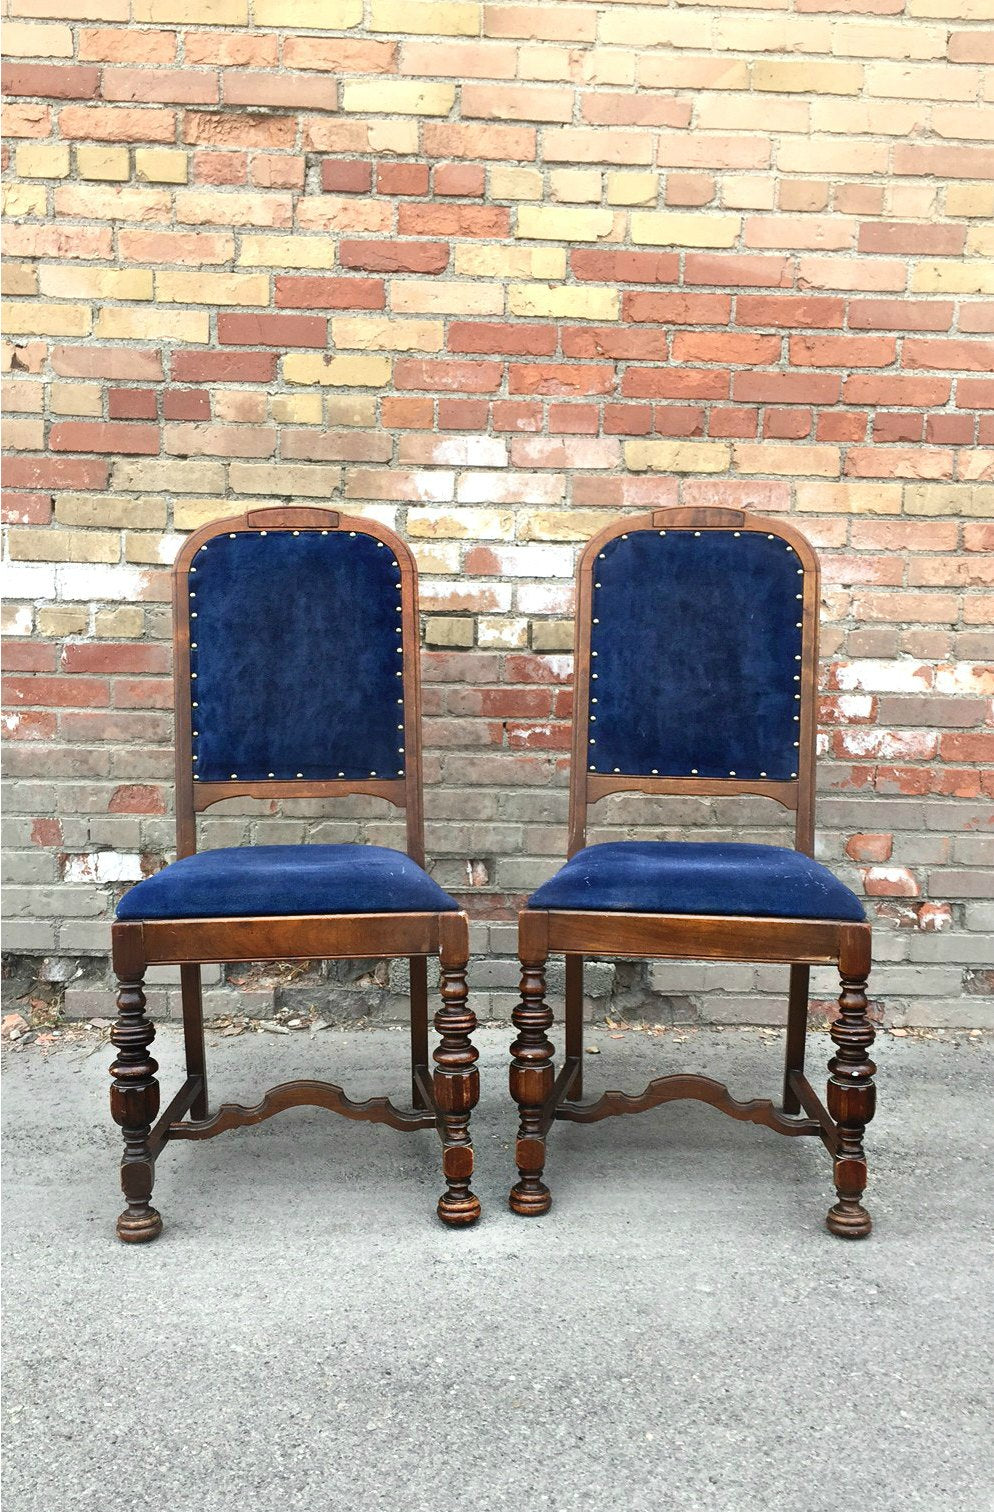 Blue suede chairs